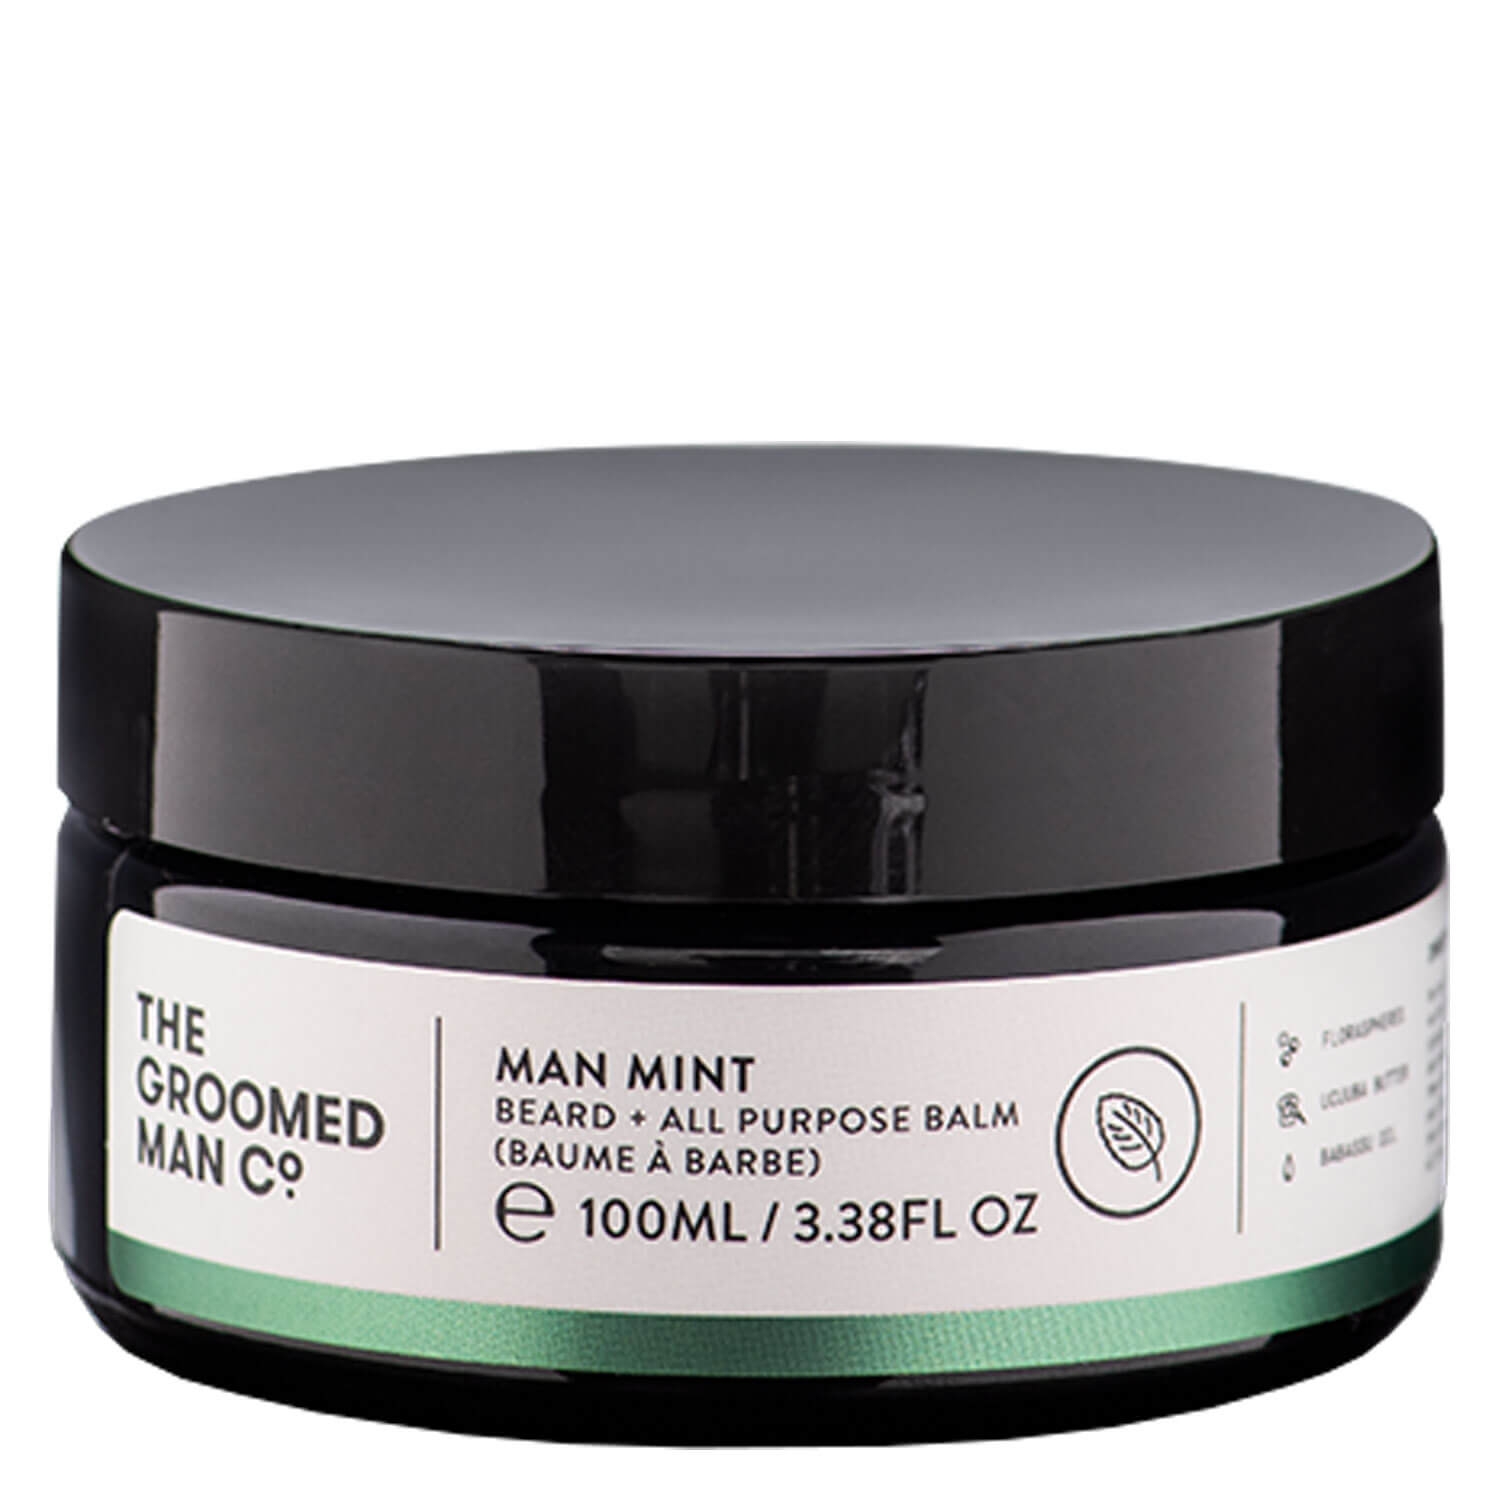 Product image from THE GROOMED MAN CO. - Man Mint Beard Balm